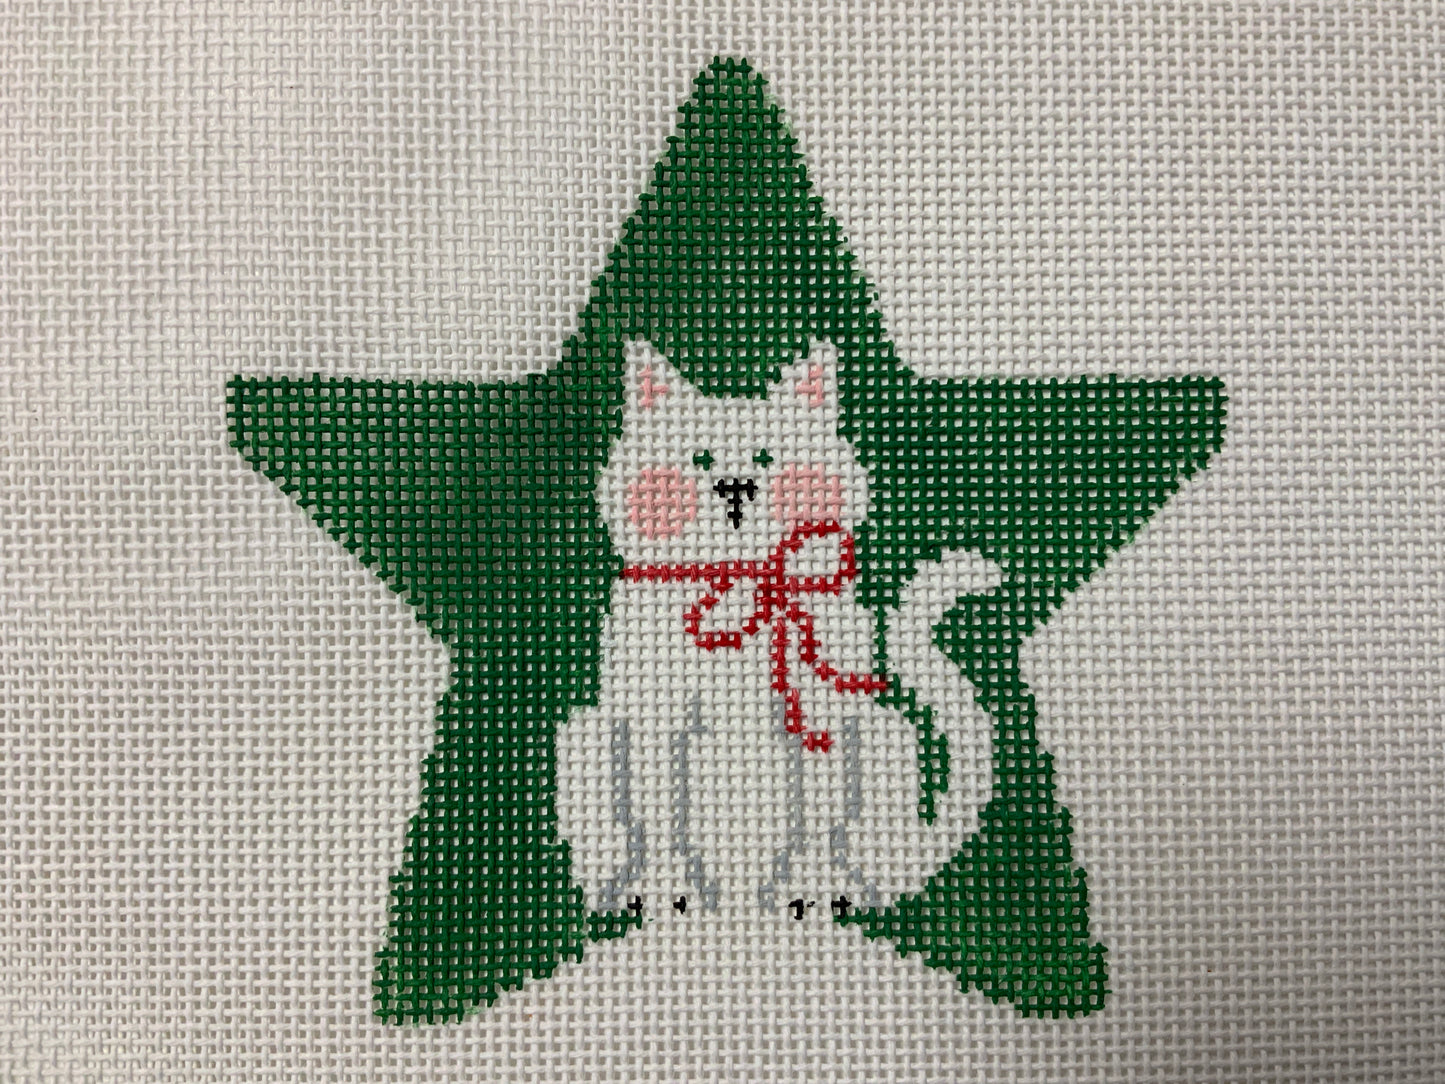 White Cat Star with Fish